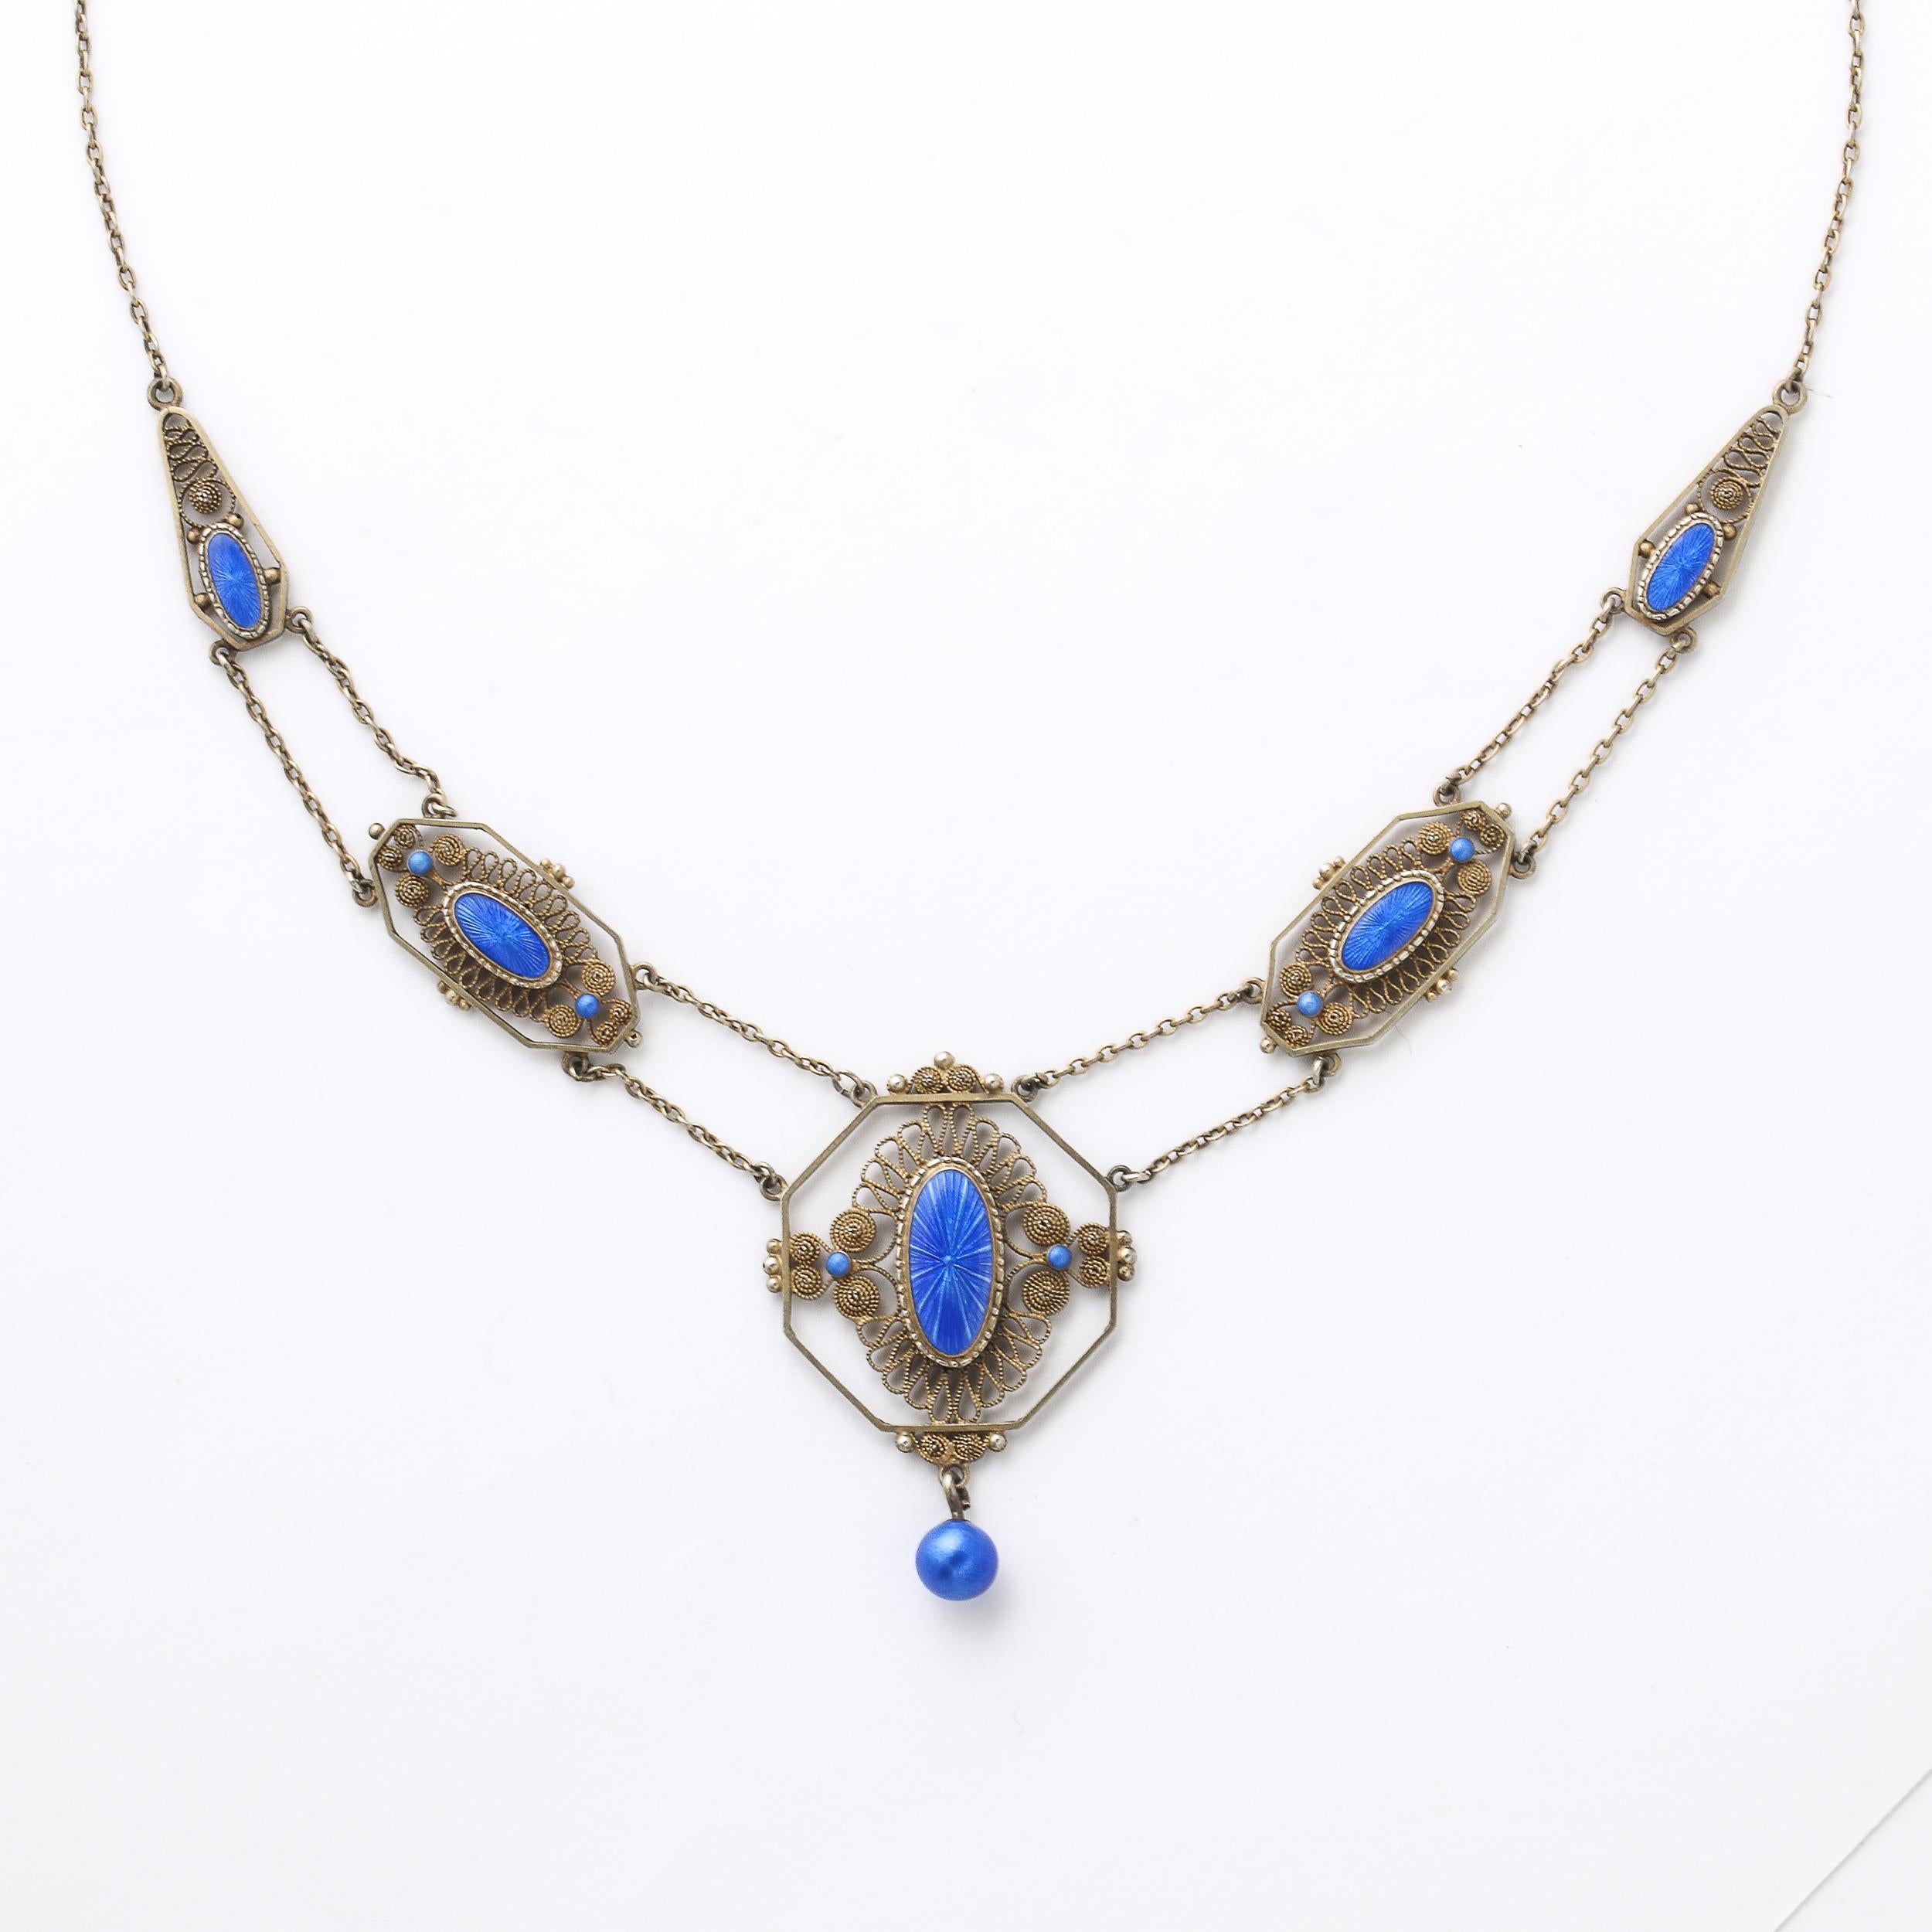 Edwardian Antique Silver Filigree Swag Style Necklace with Blue Guilloche Enamel Accents